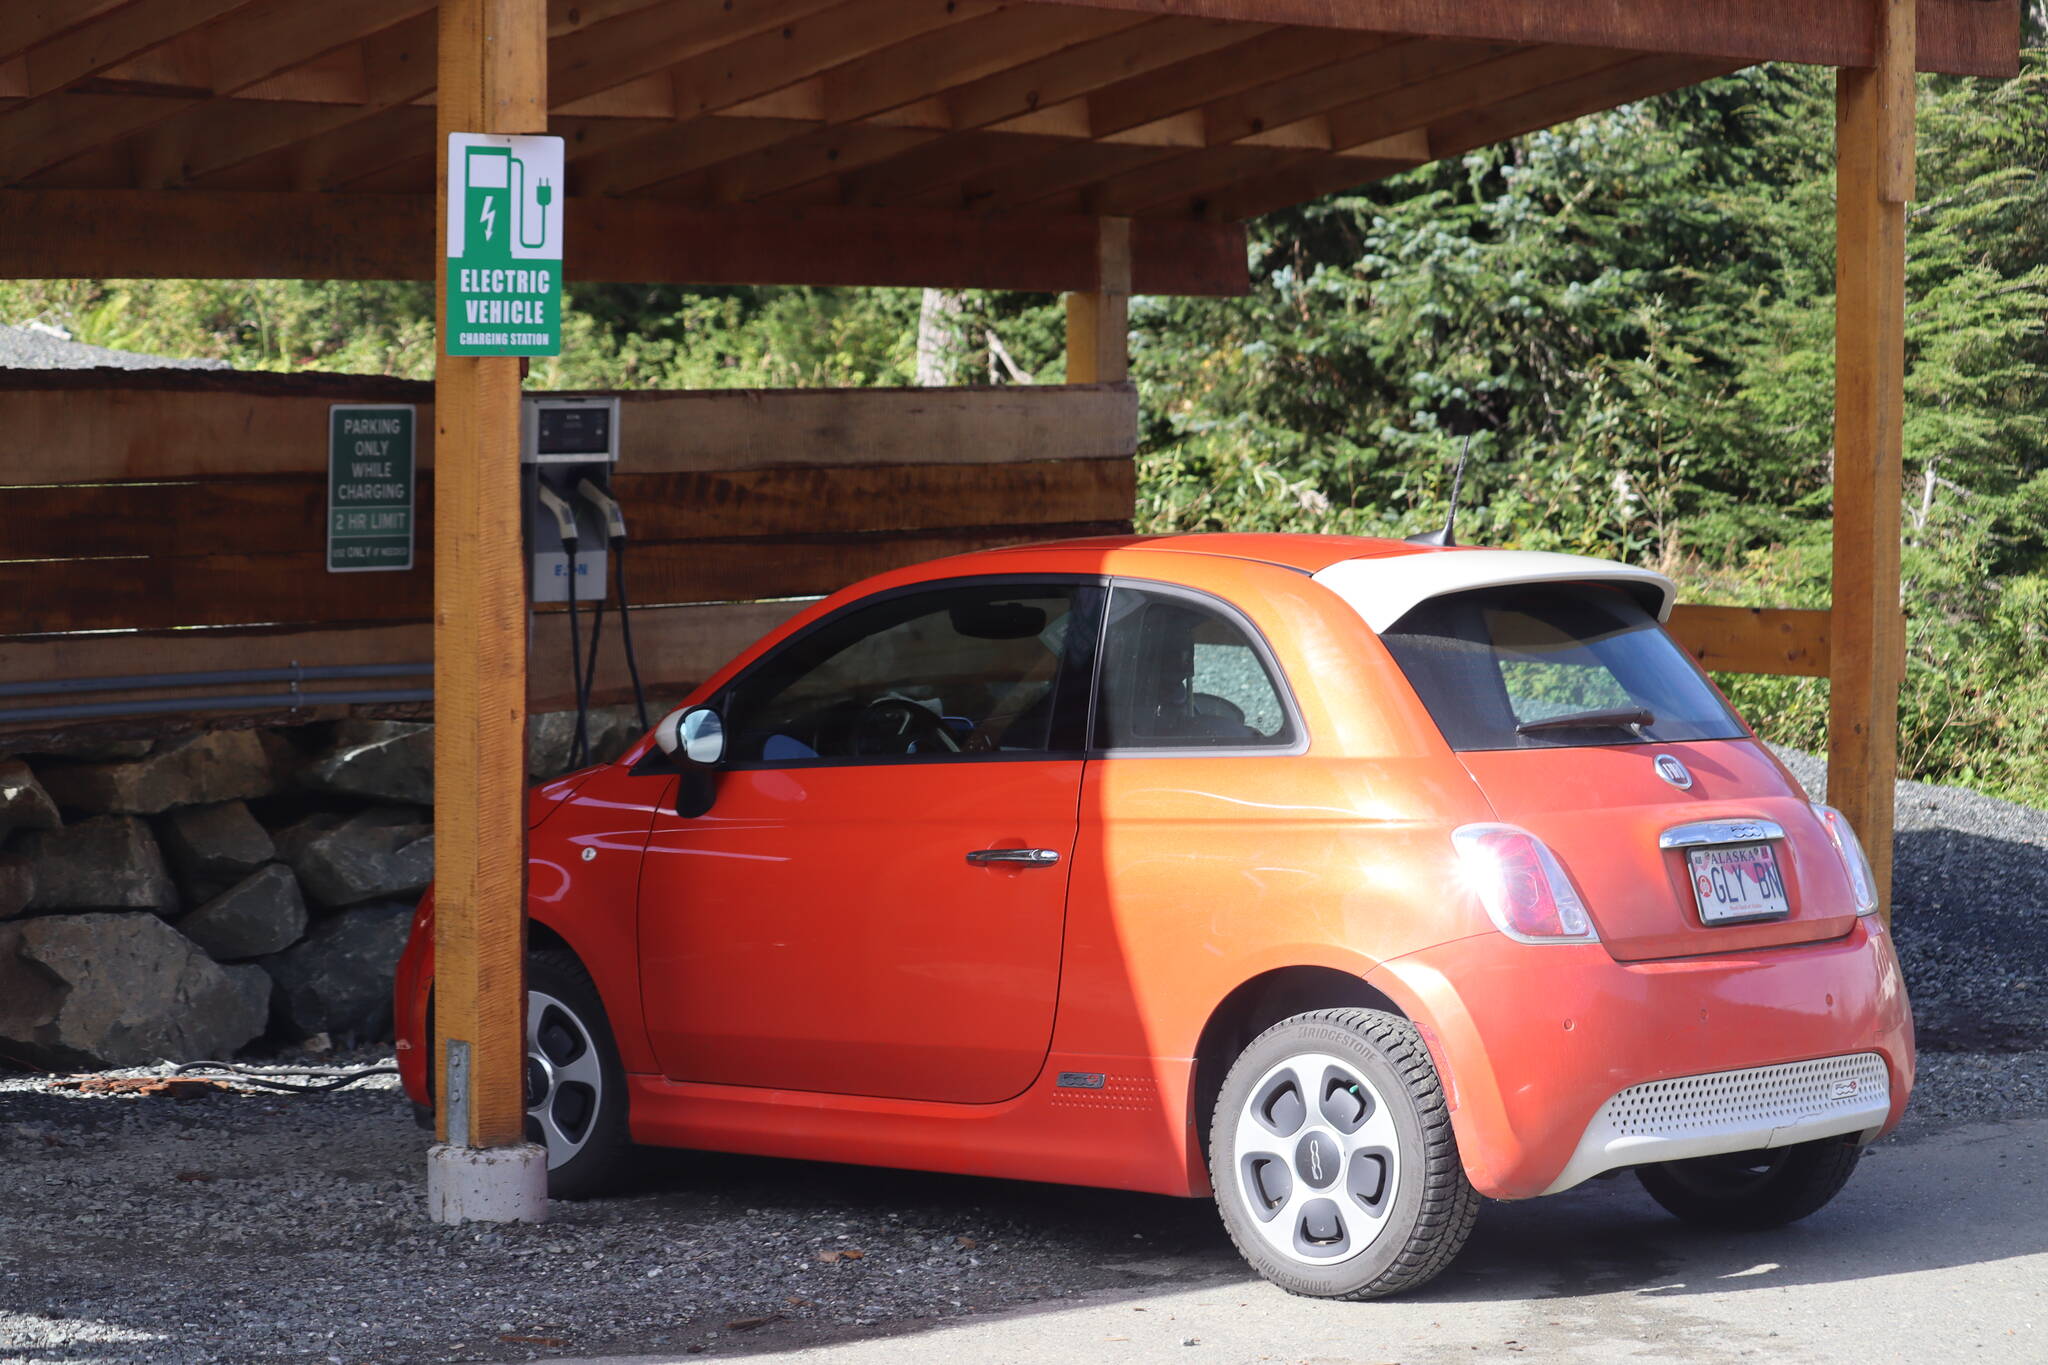 One of the many new attractions at Eaglecrest this year is the installation of their new electric car charging station offered in the main parking lot. (Jonson Kuhn / Juneau Empire)